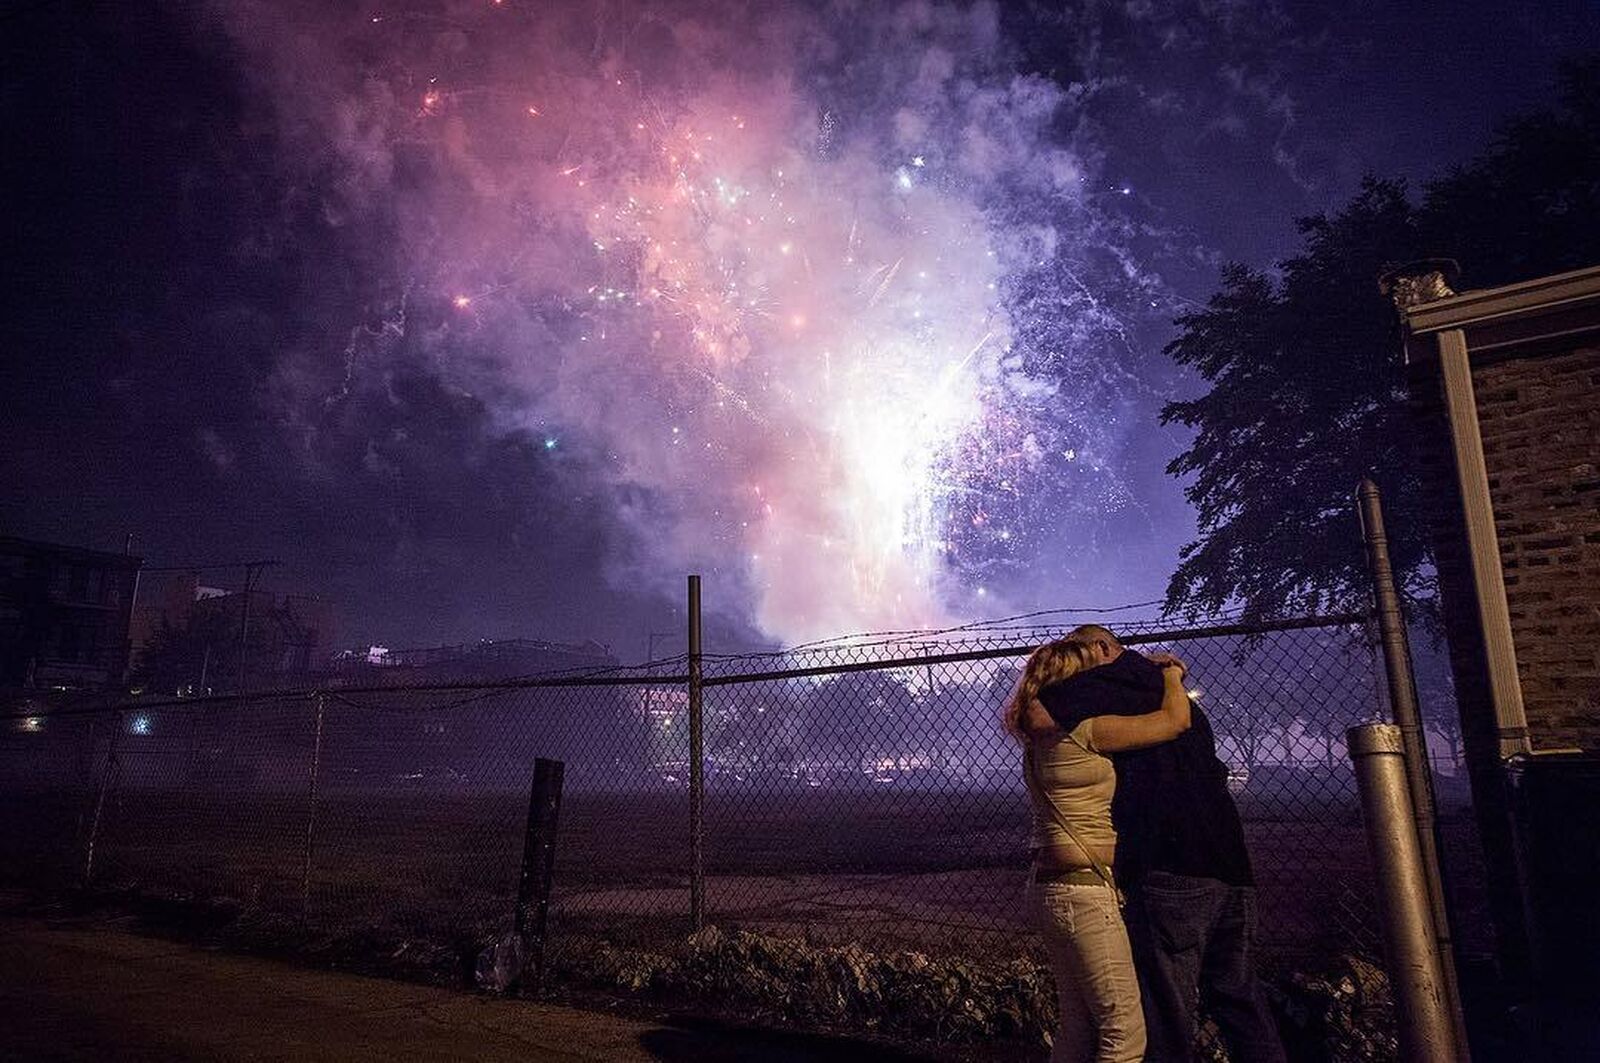 A couple embraces in front of fireworks in an alley in Chicago on July 4th